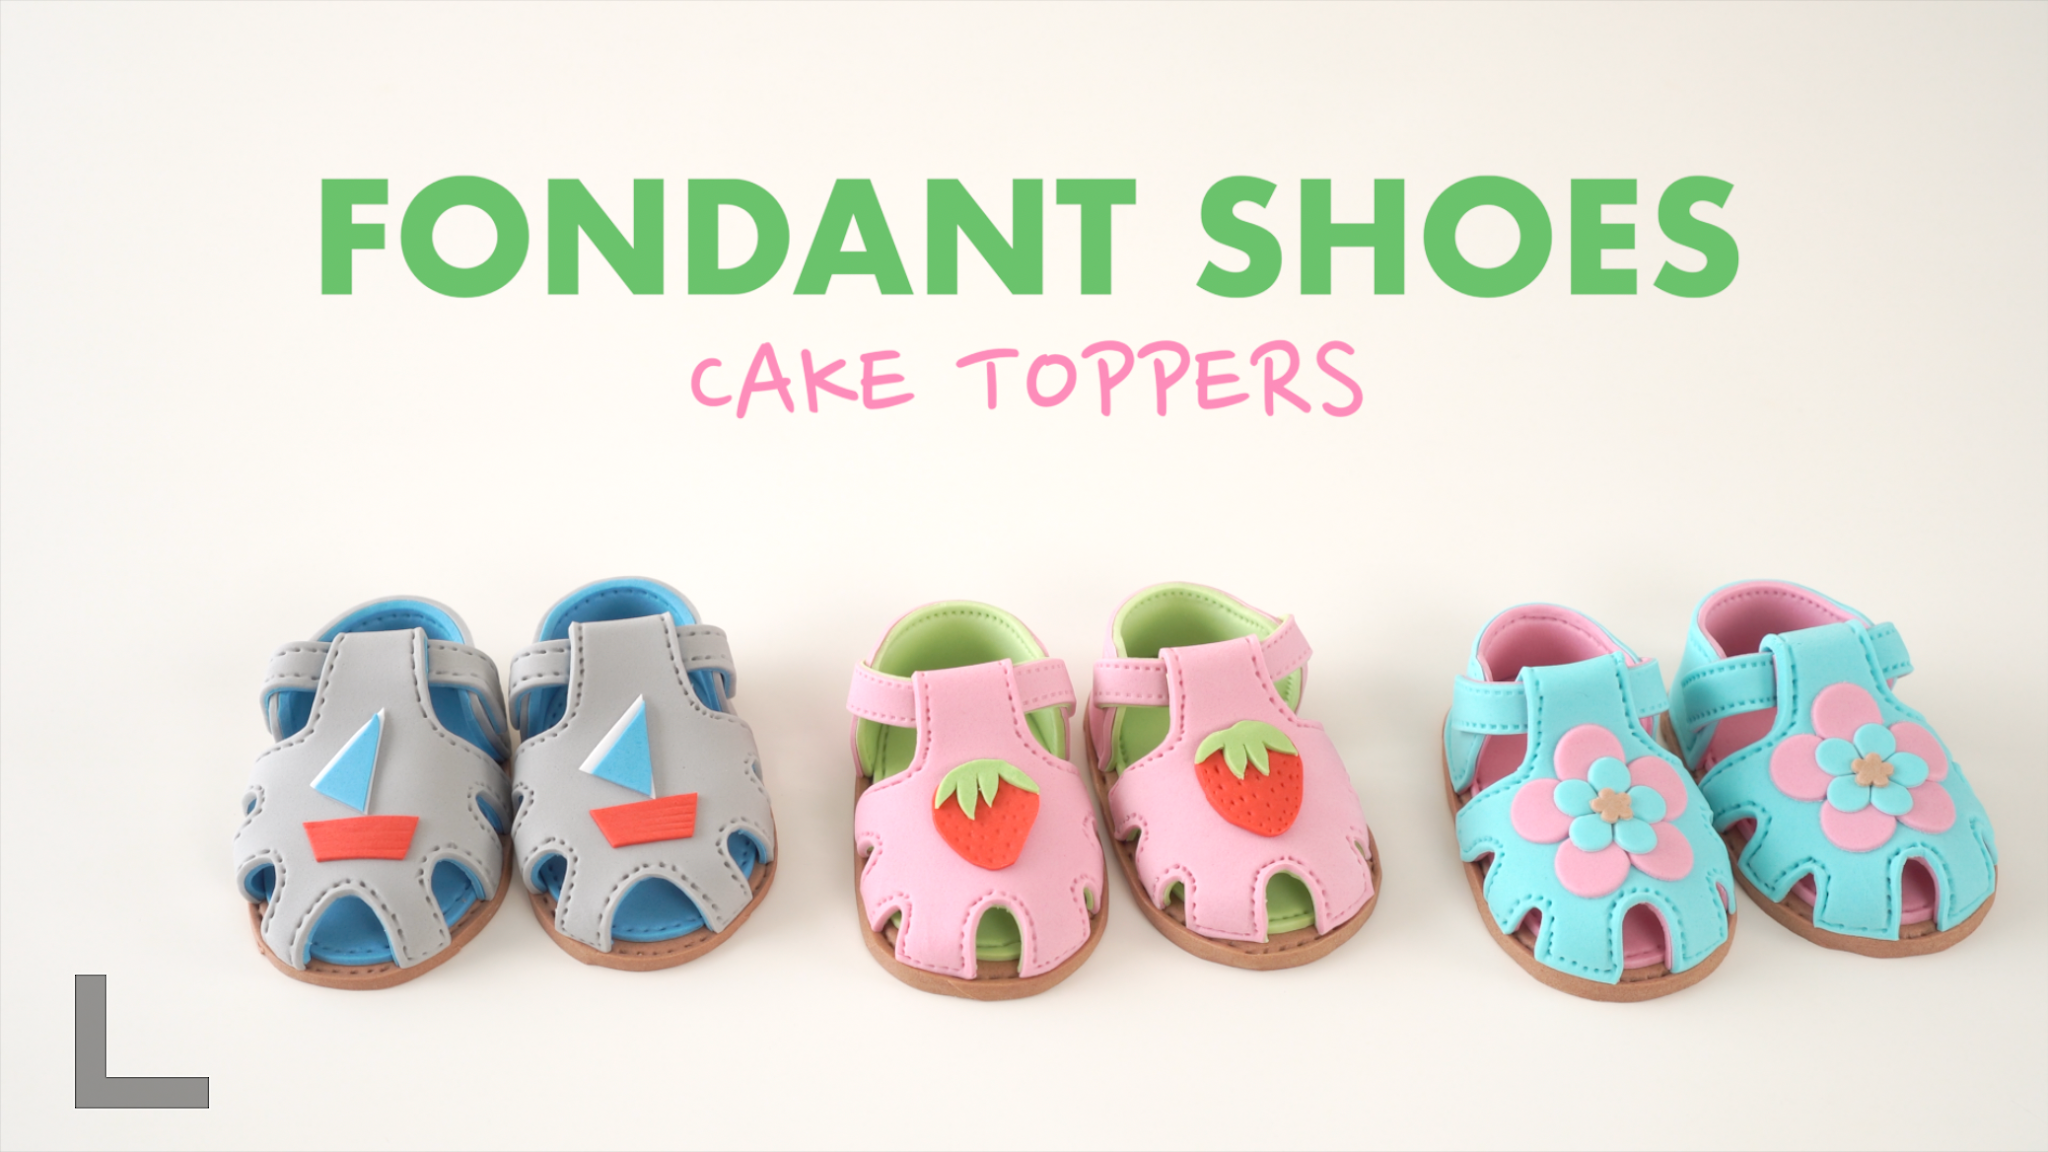 Fondant Baby Shoes Cake Toppers Creative Cake Decorating Ideas I Spring Summer Sandals